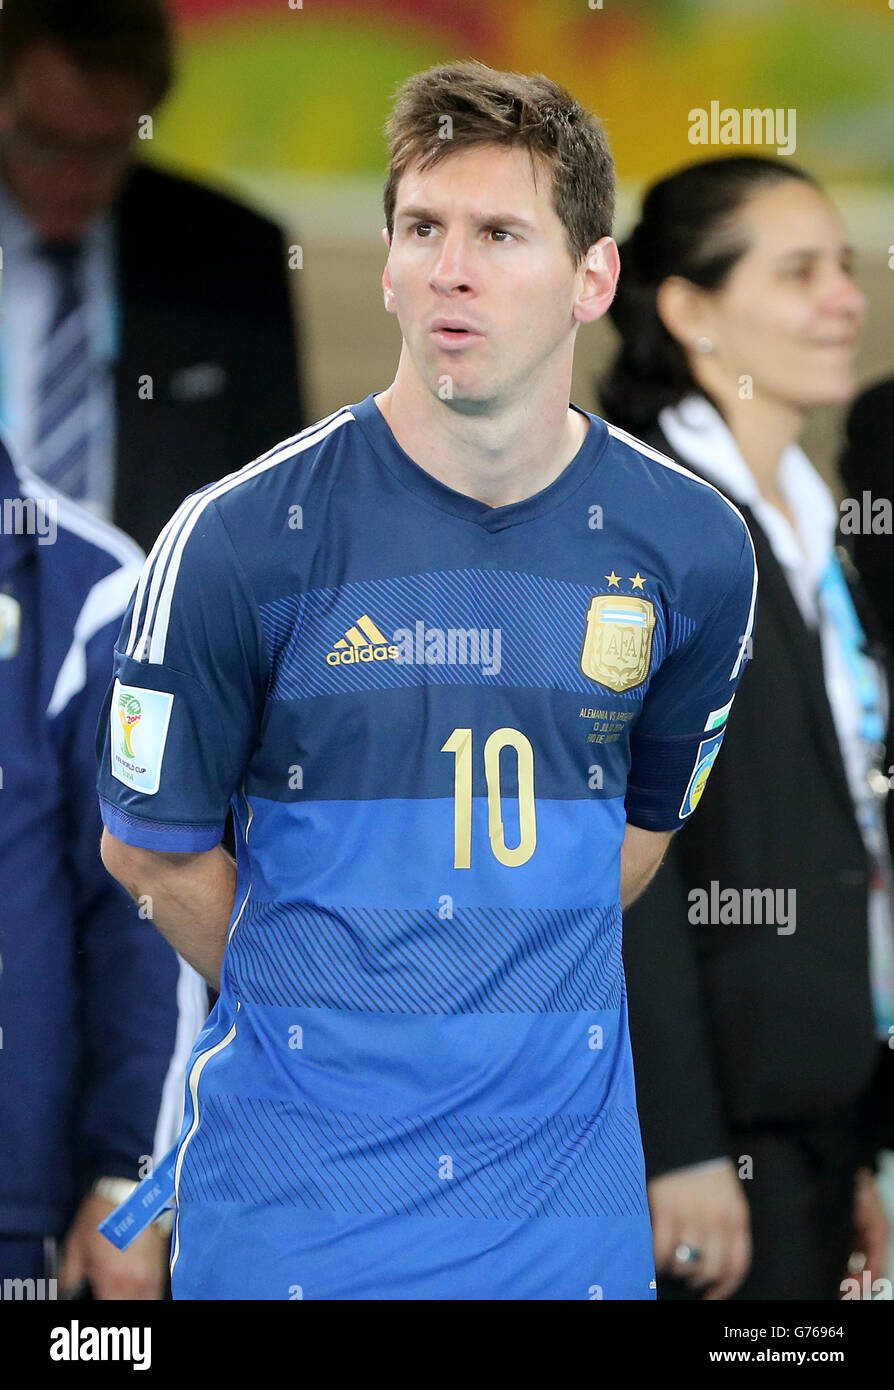 Soccer - FIFA World Cup 2014 - Final - Germany v Argentina - Estadio do Maracana. Argentina's Lionel Messi looks on after collecting his runner's up medal Stock Photo